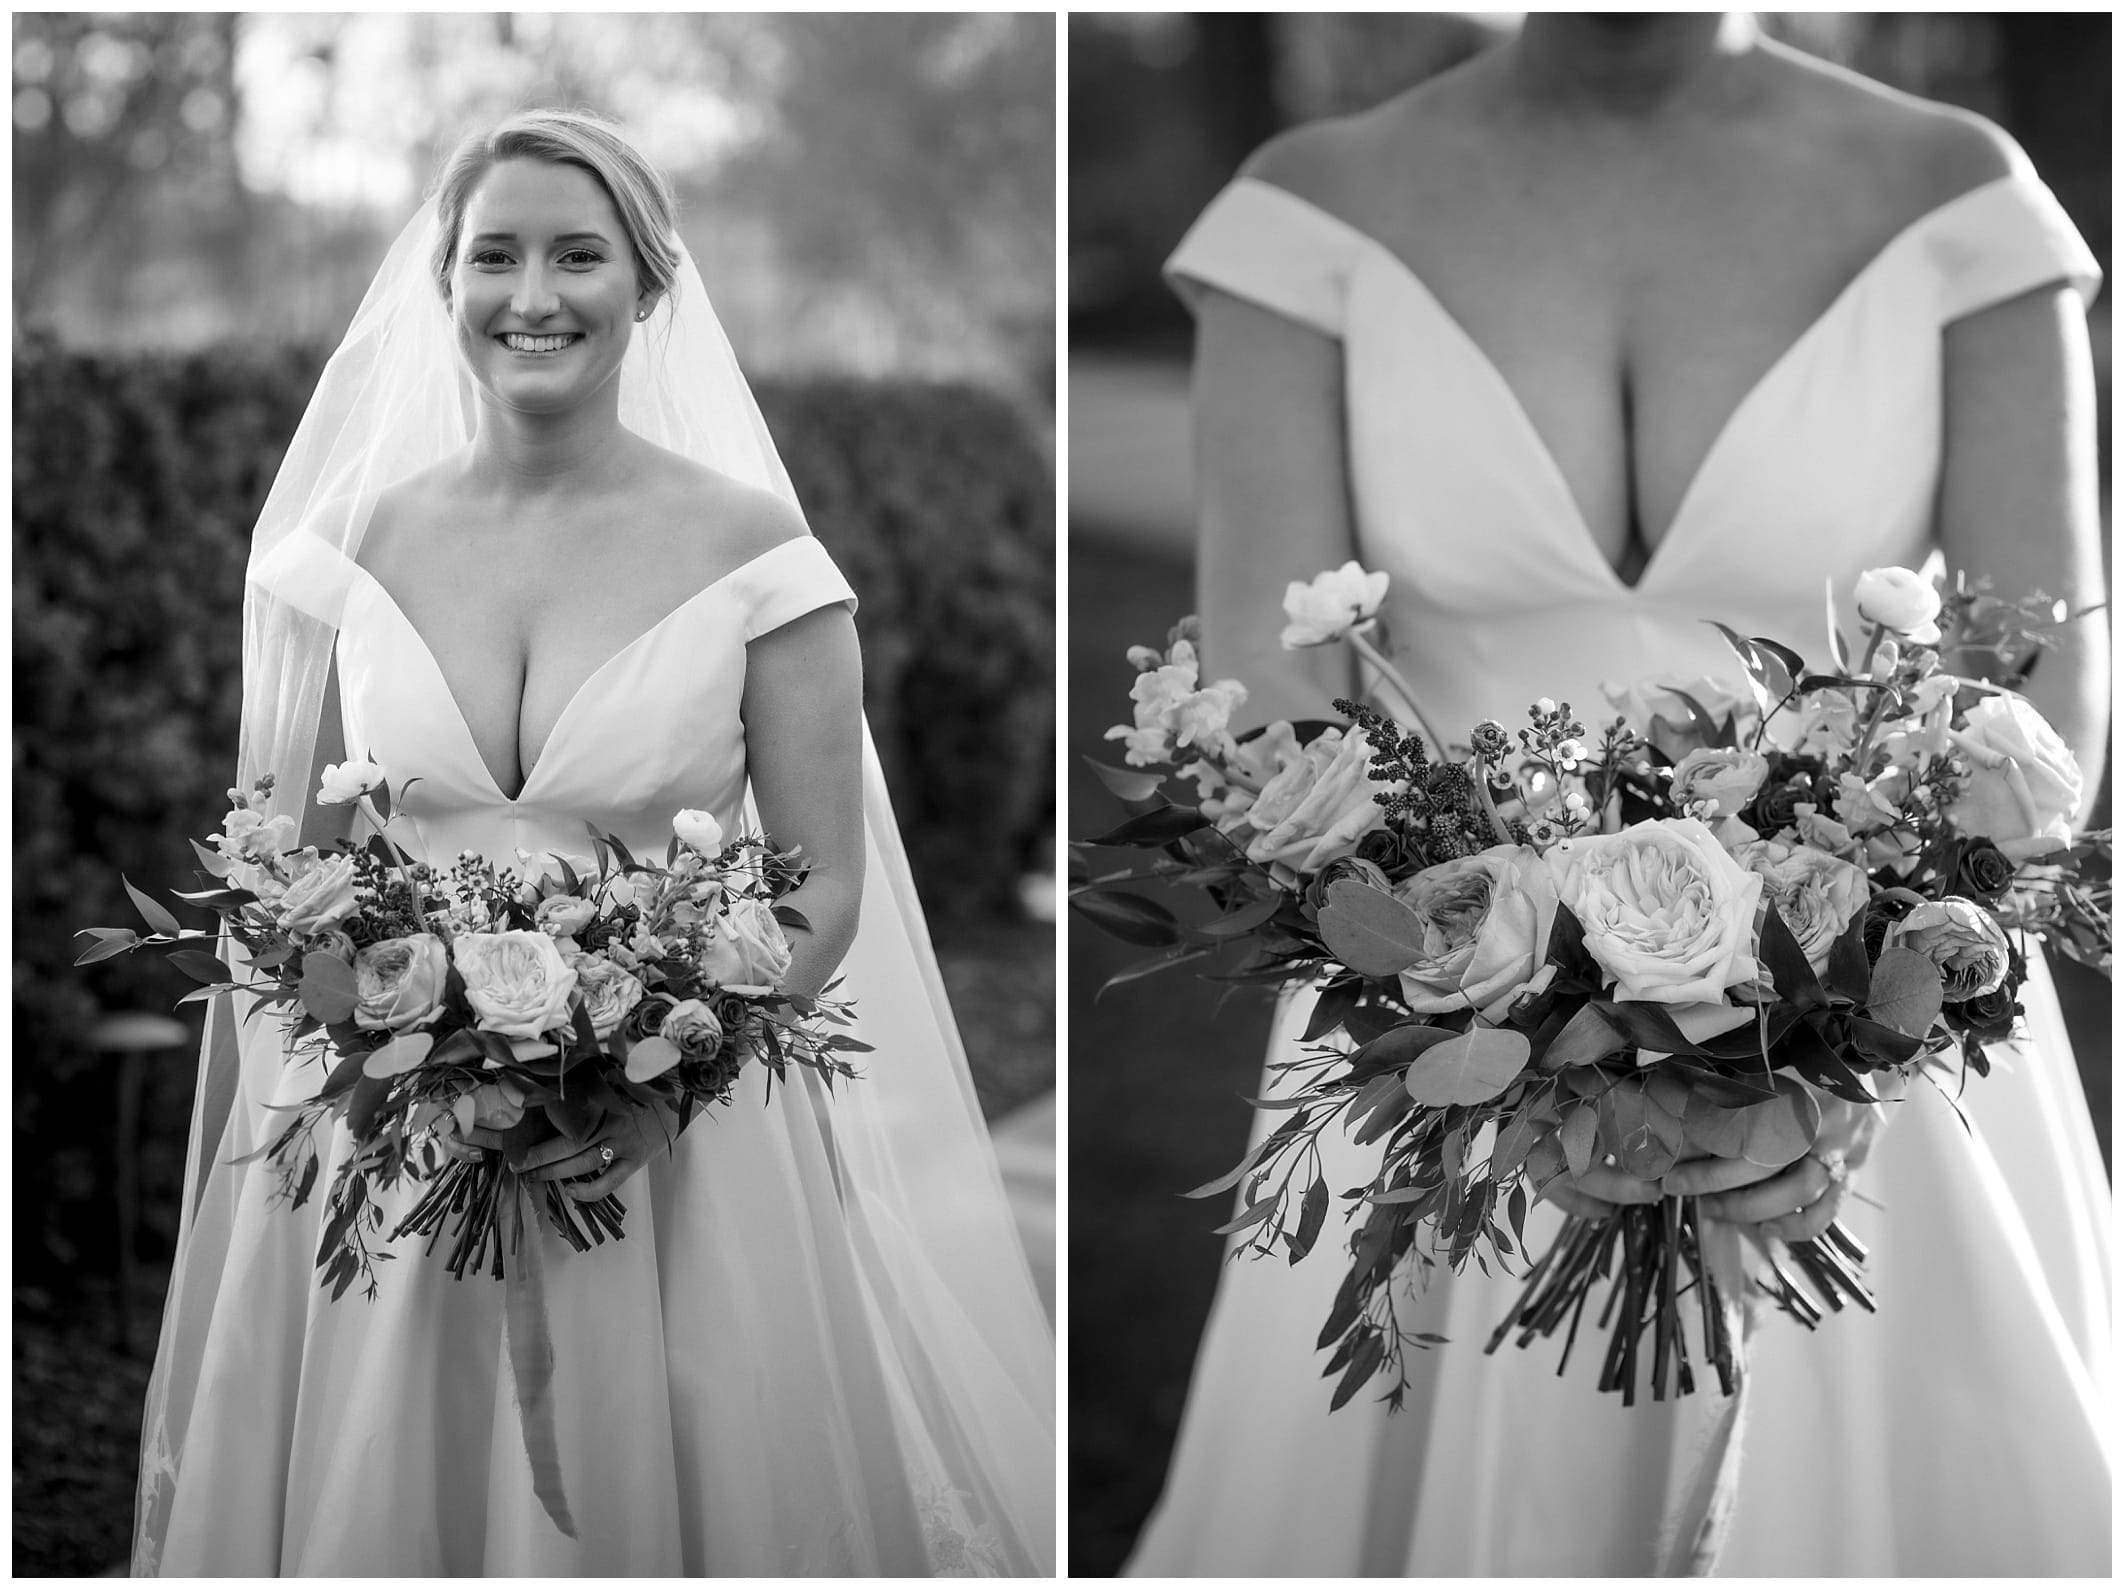 Bridal portrait in black and white by Kathy Beaver Photography